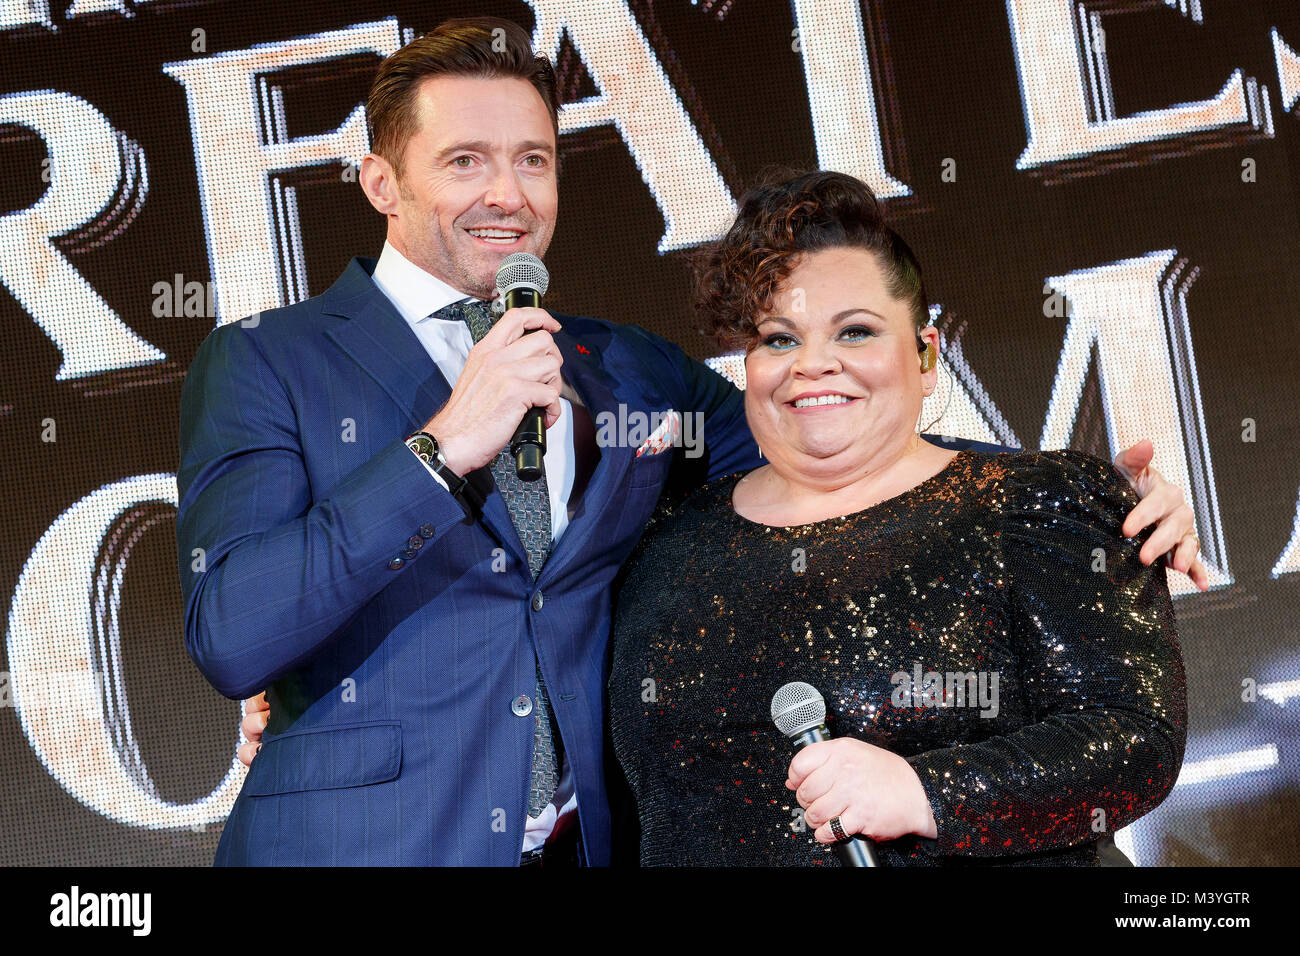 Tokyo, Japan. 13th Feb, 2018. (L to R) Australian actor Hugh Jackman and American actress/singer Keala Settle, speak during a special red carpet event for the film ''The Greatest Showman'' on February 13, 2018, Tokyo, Japan. The Japanese musical movie directed by Michael Gracey will be released in Japan on February 16. Credit: Rodrigo Reyes Marin/AFLO/Alamy Live News Stock Photo